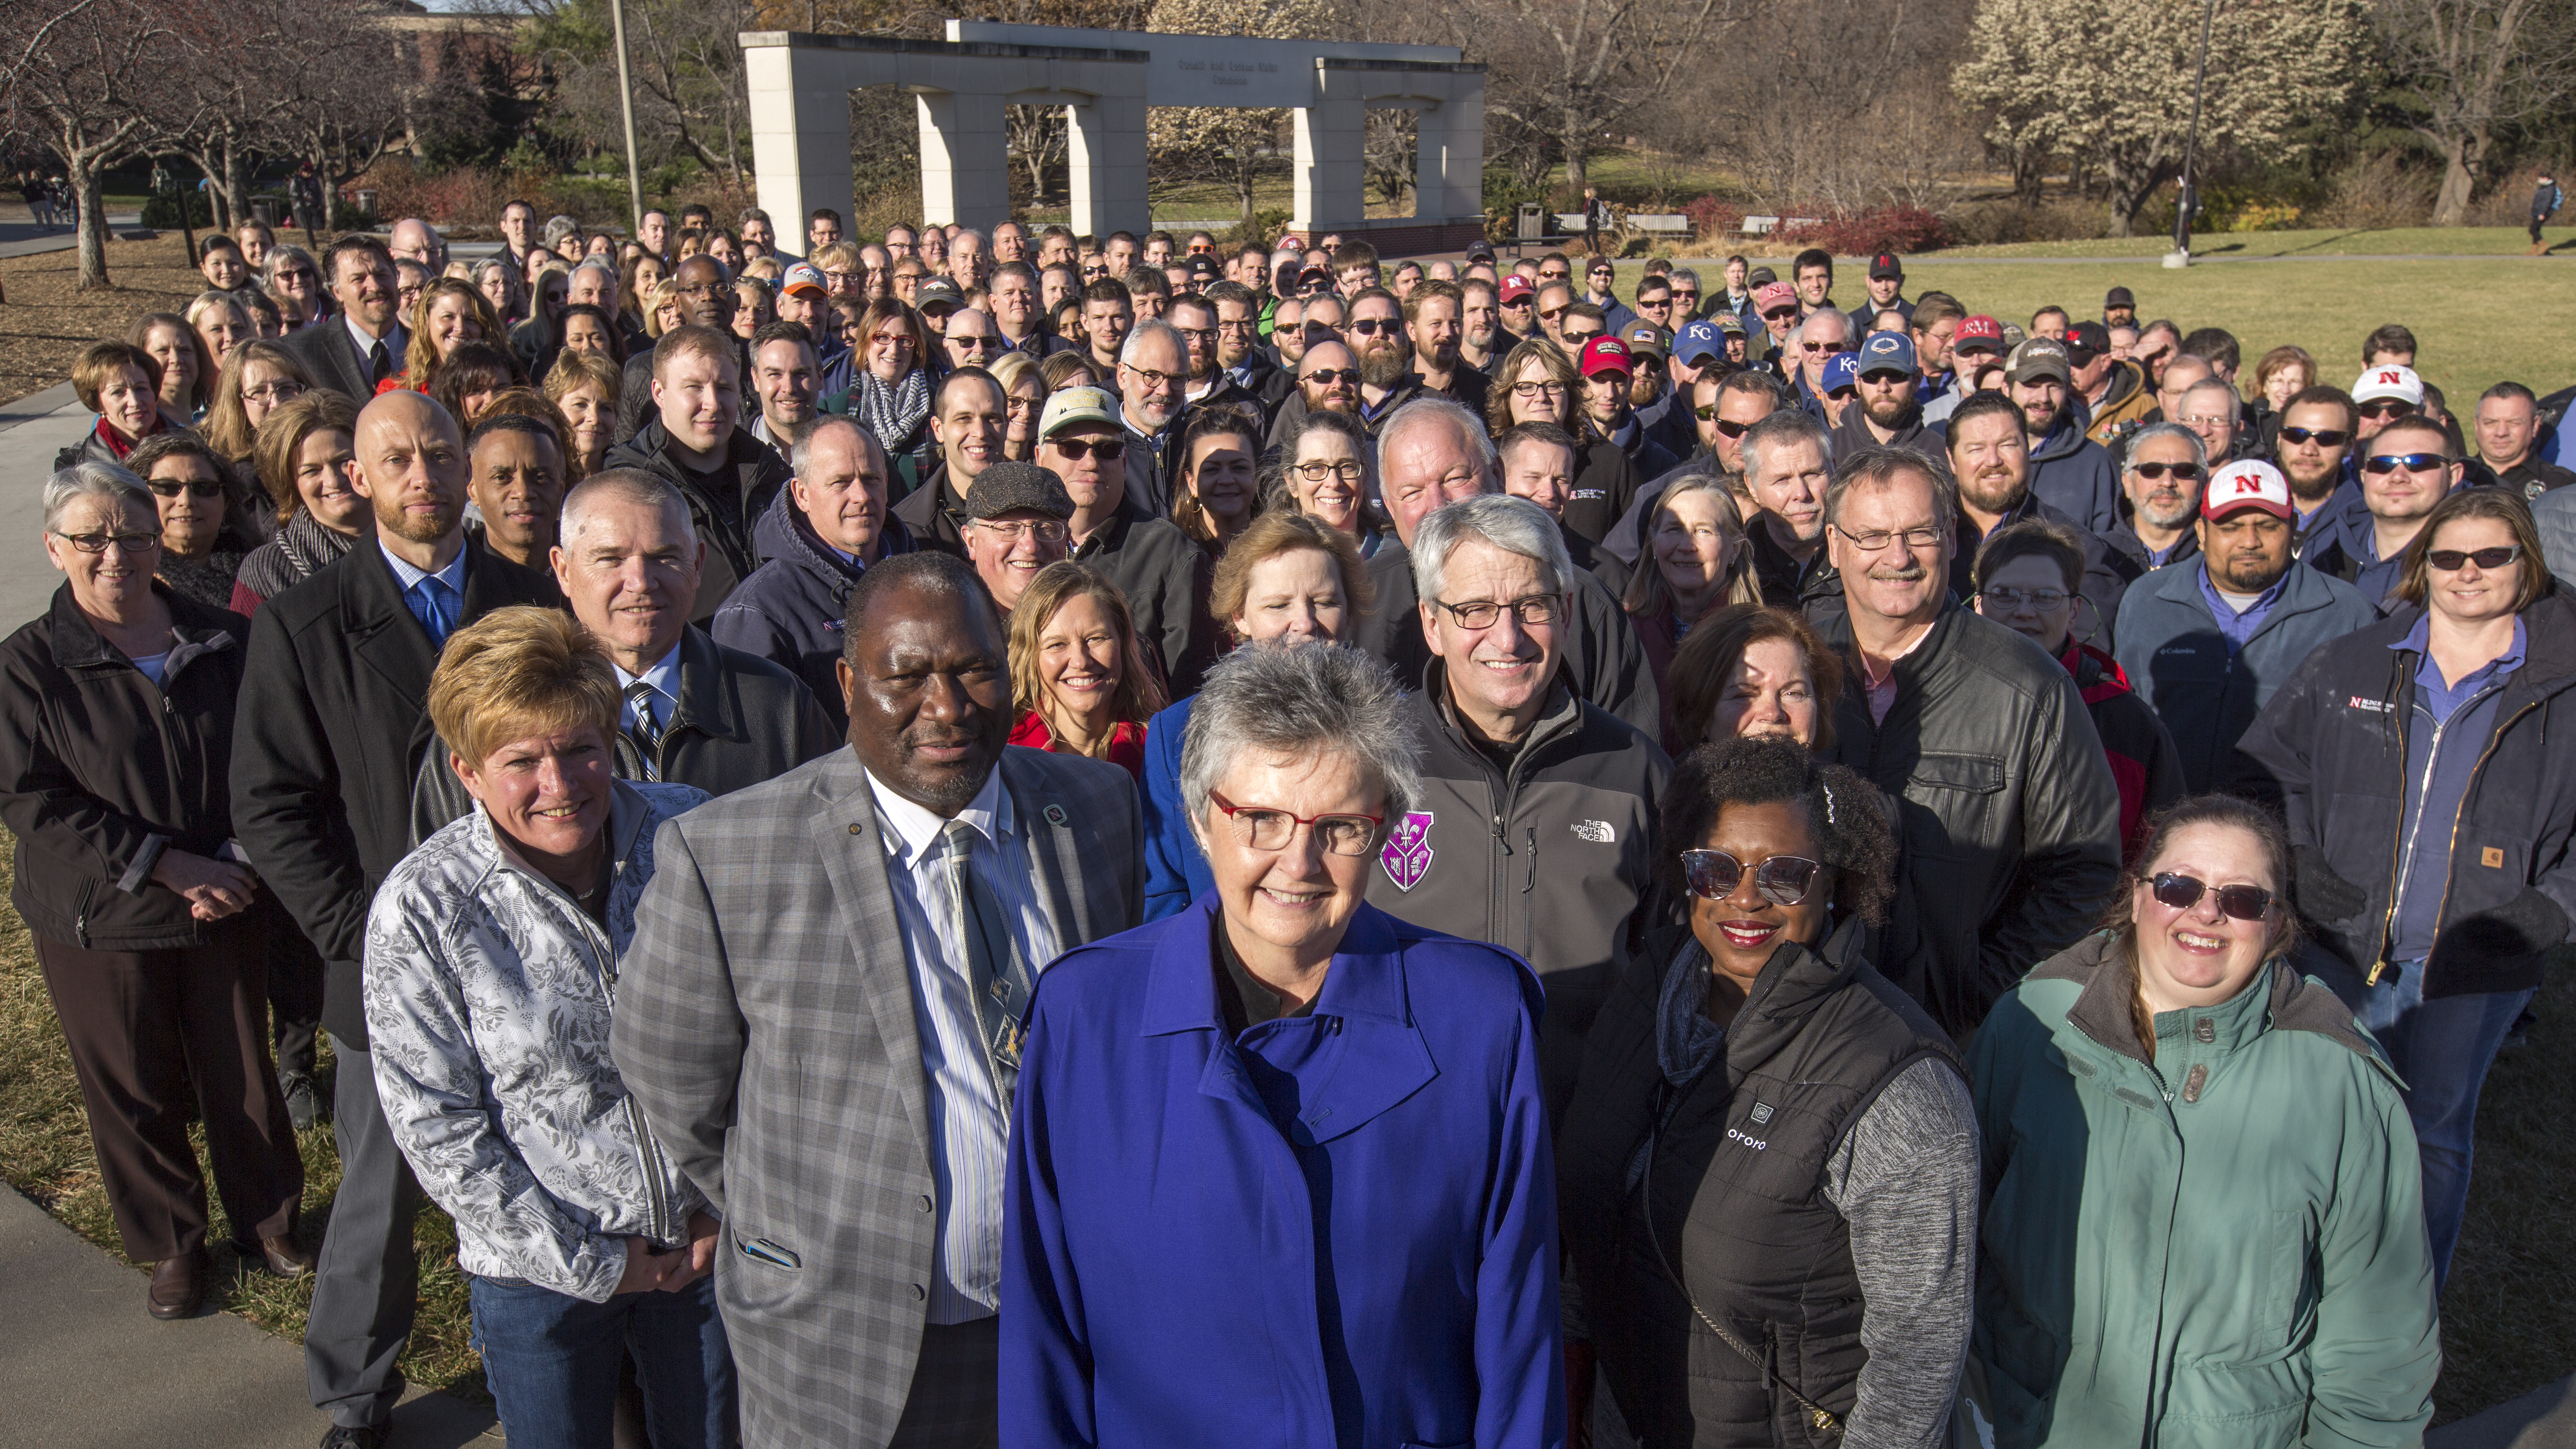 Christine Jackson (front, center, in blue coat) stands with more than 200 Business and Finance employees on the Nebraska Union Plaza. The employees showed up to surprise Jackson for the photo. She is retiring at the end of December after 17 years of service as Nebraska's vice chancellor for business and finance.